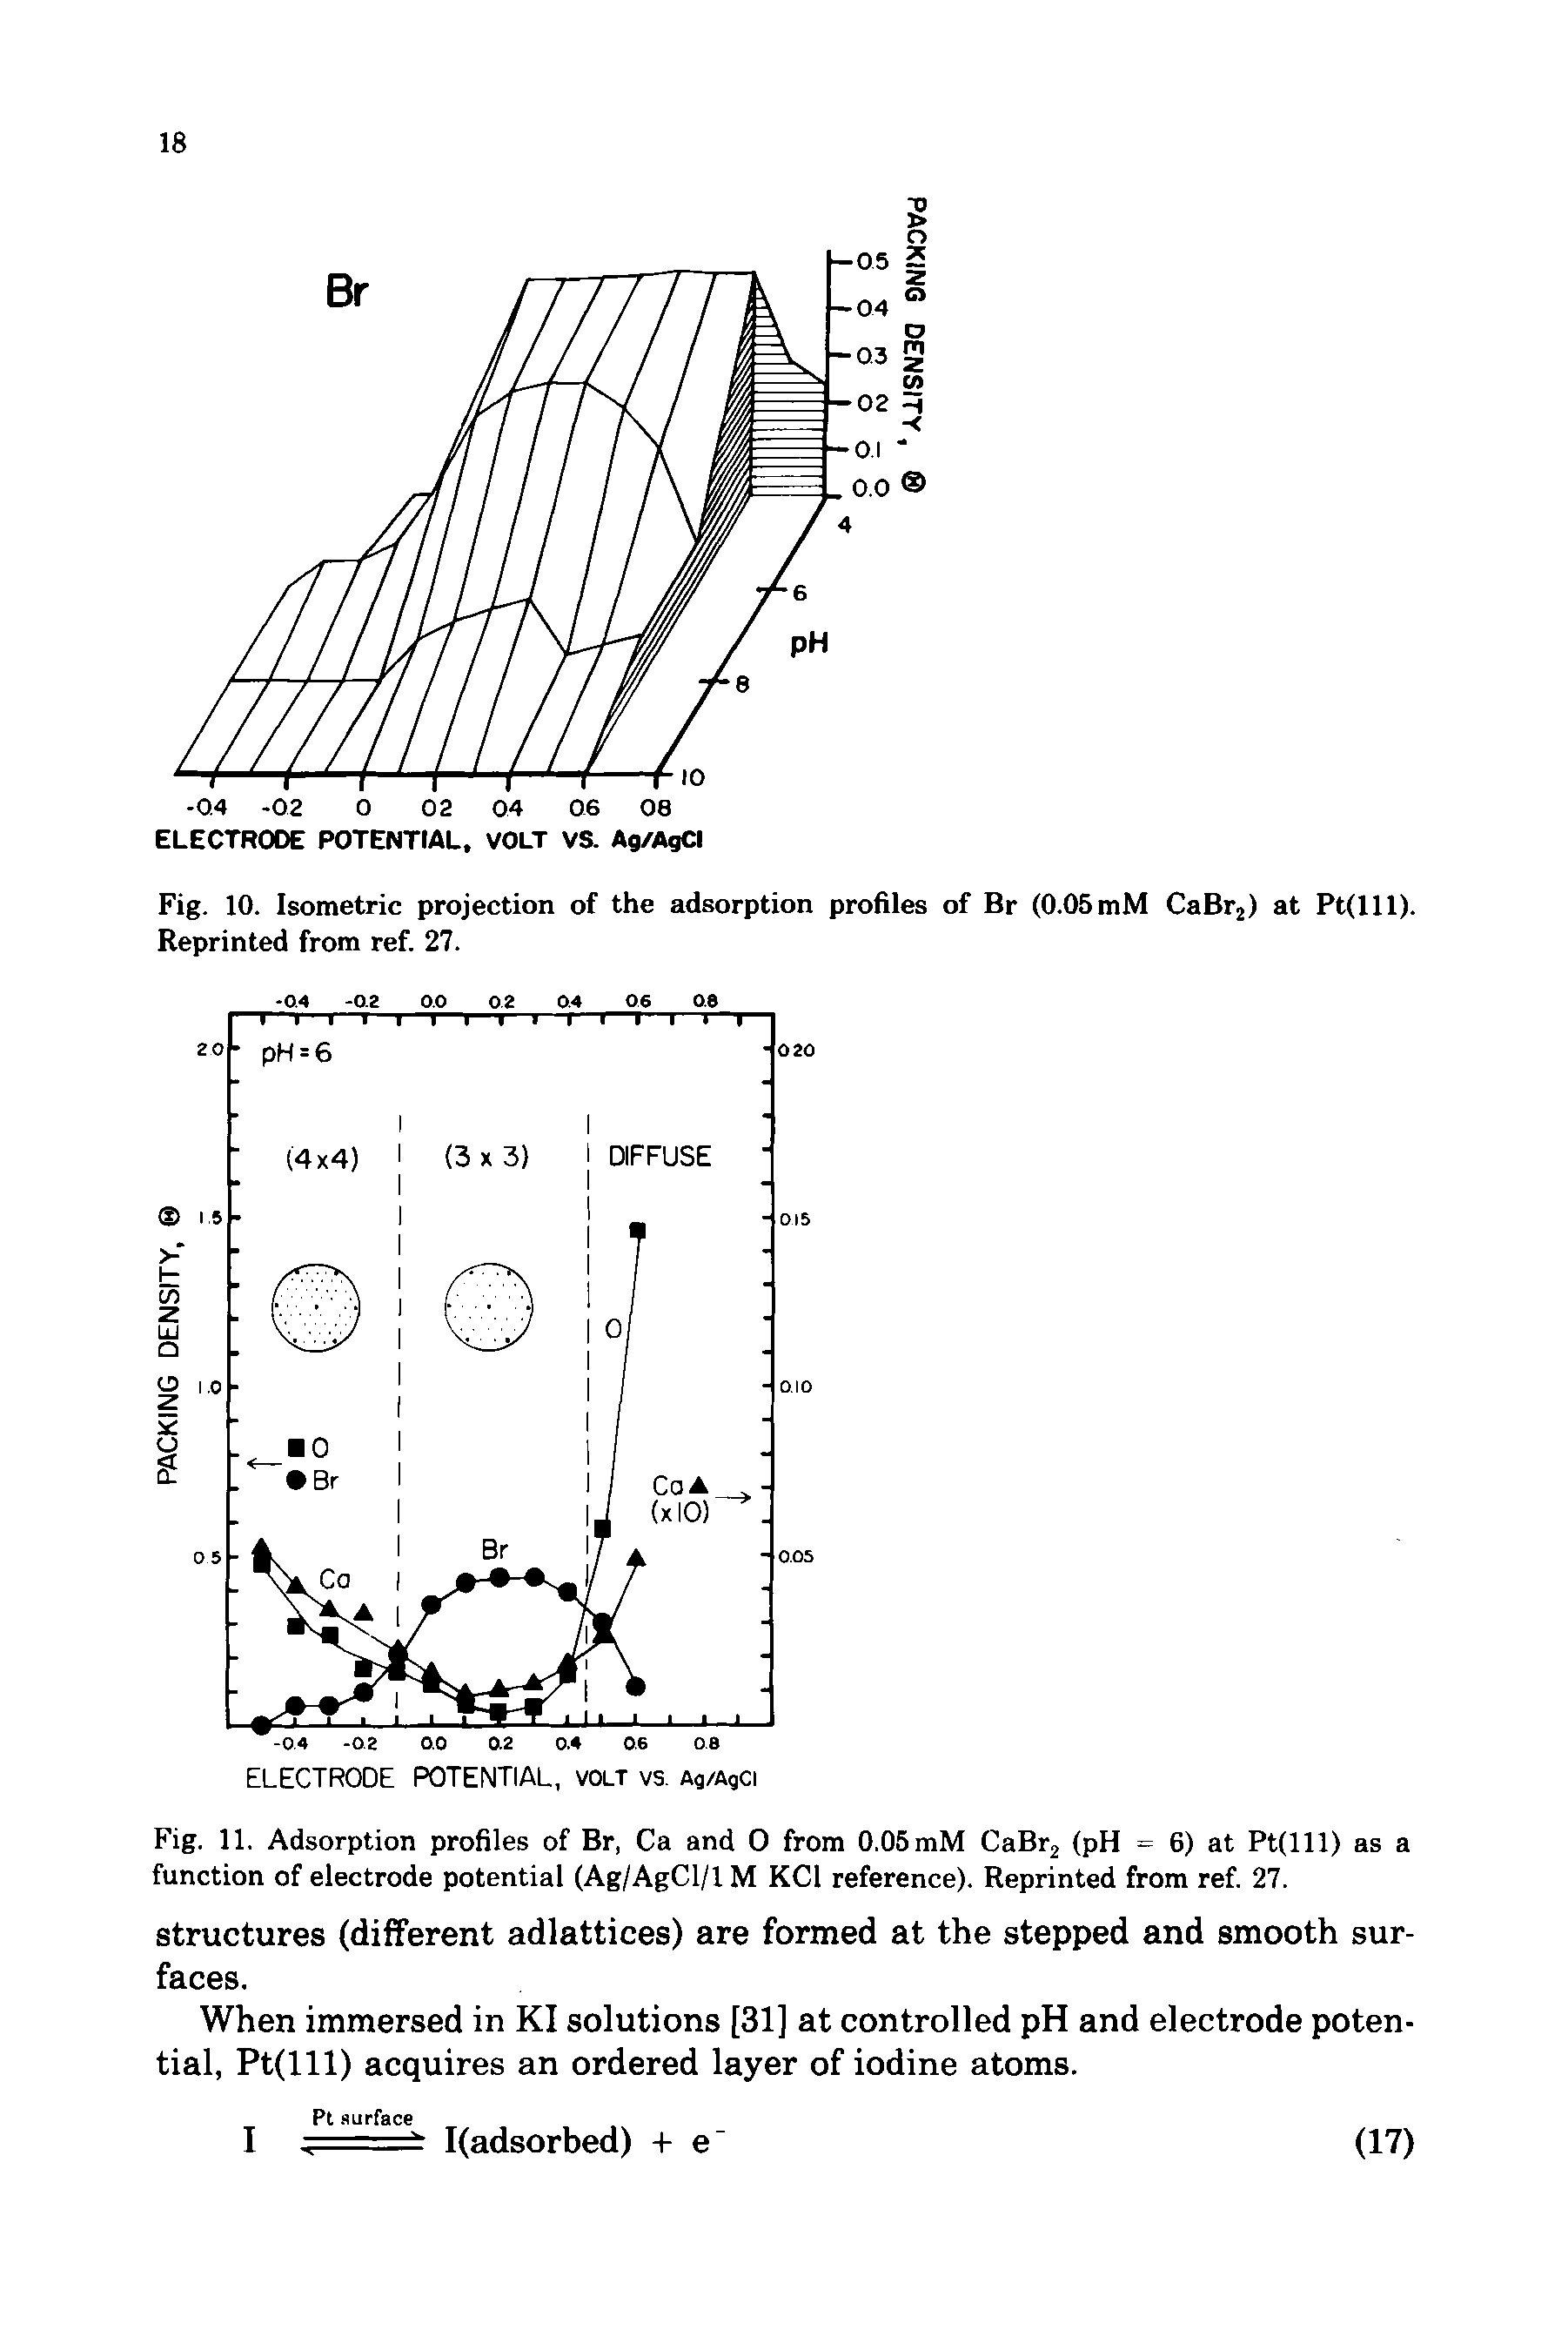 Fig. 10. Isometric projection of the adsorption profiles of Br (0.05mM CaBr2) at Pt(lll). Reprinted from ref. 27.